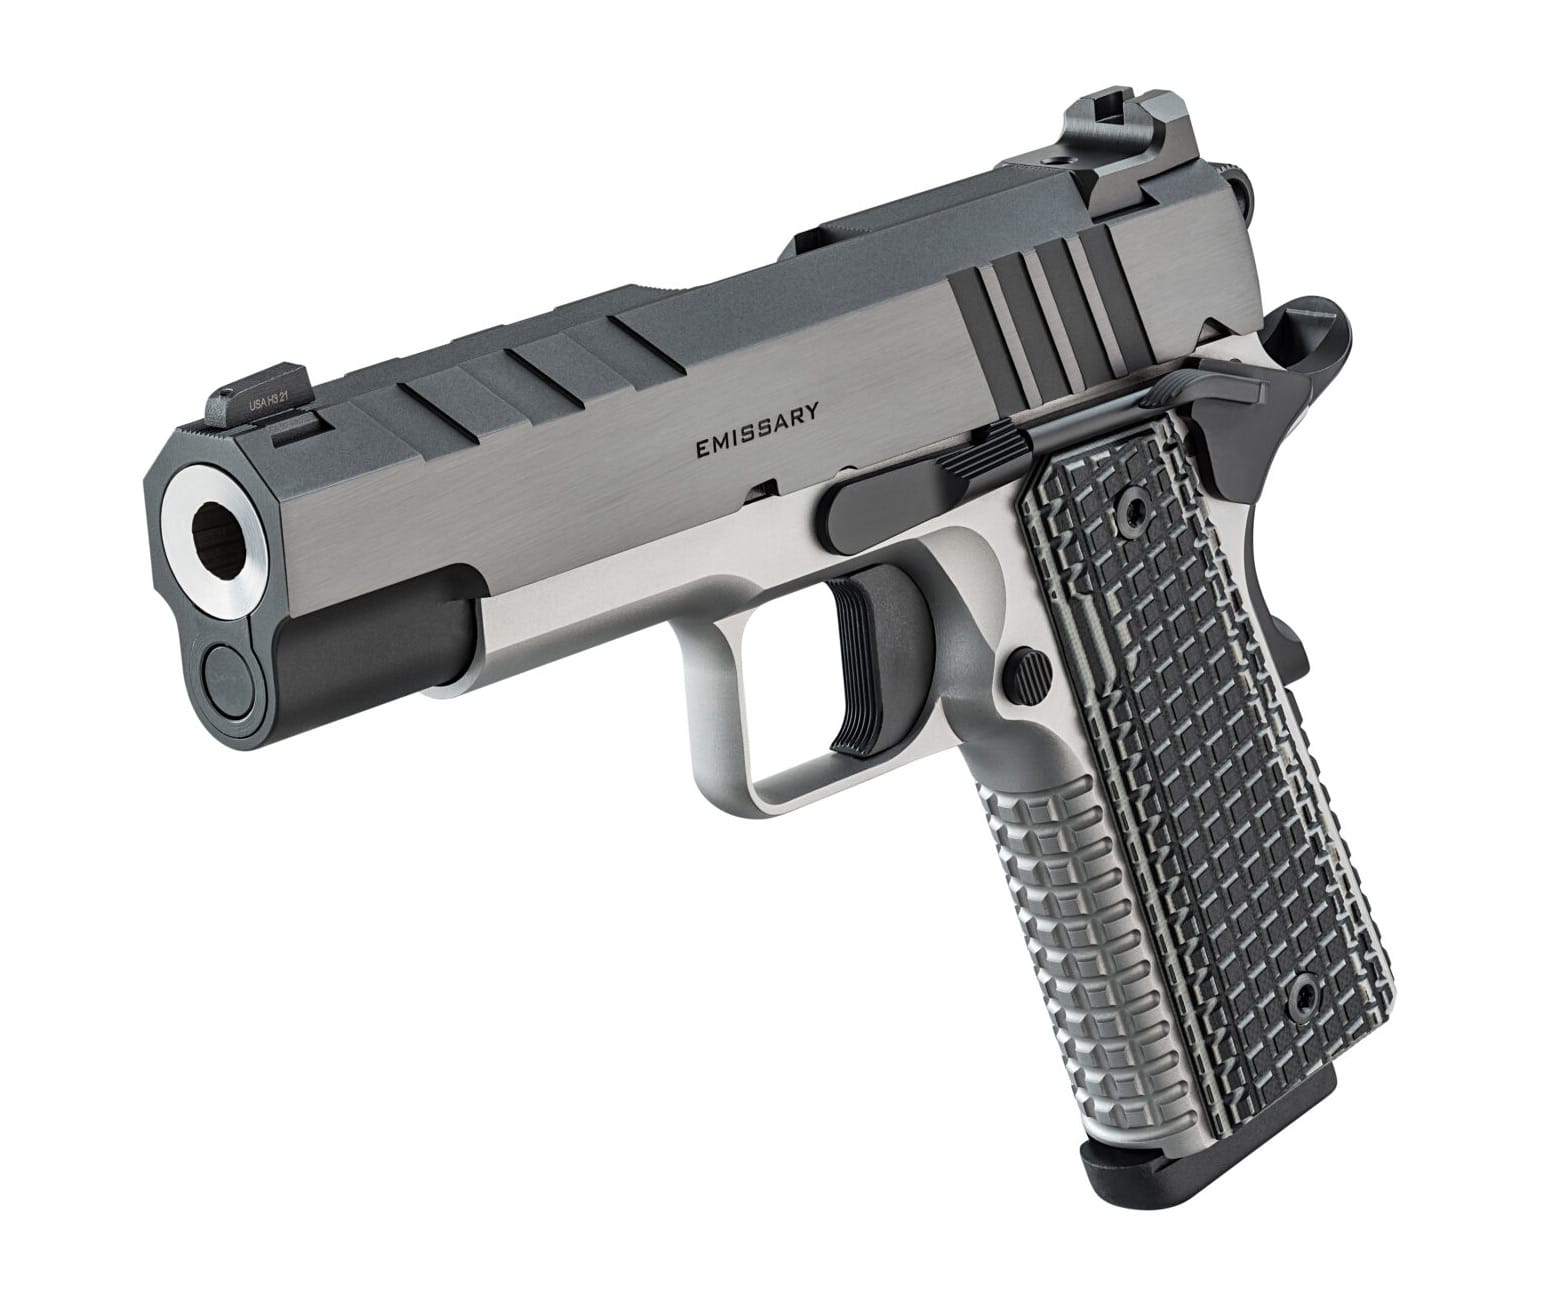 Springfield Armory 1911 Emissary 4.25" pistol chambered in 9mm